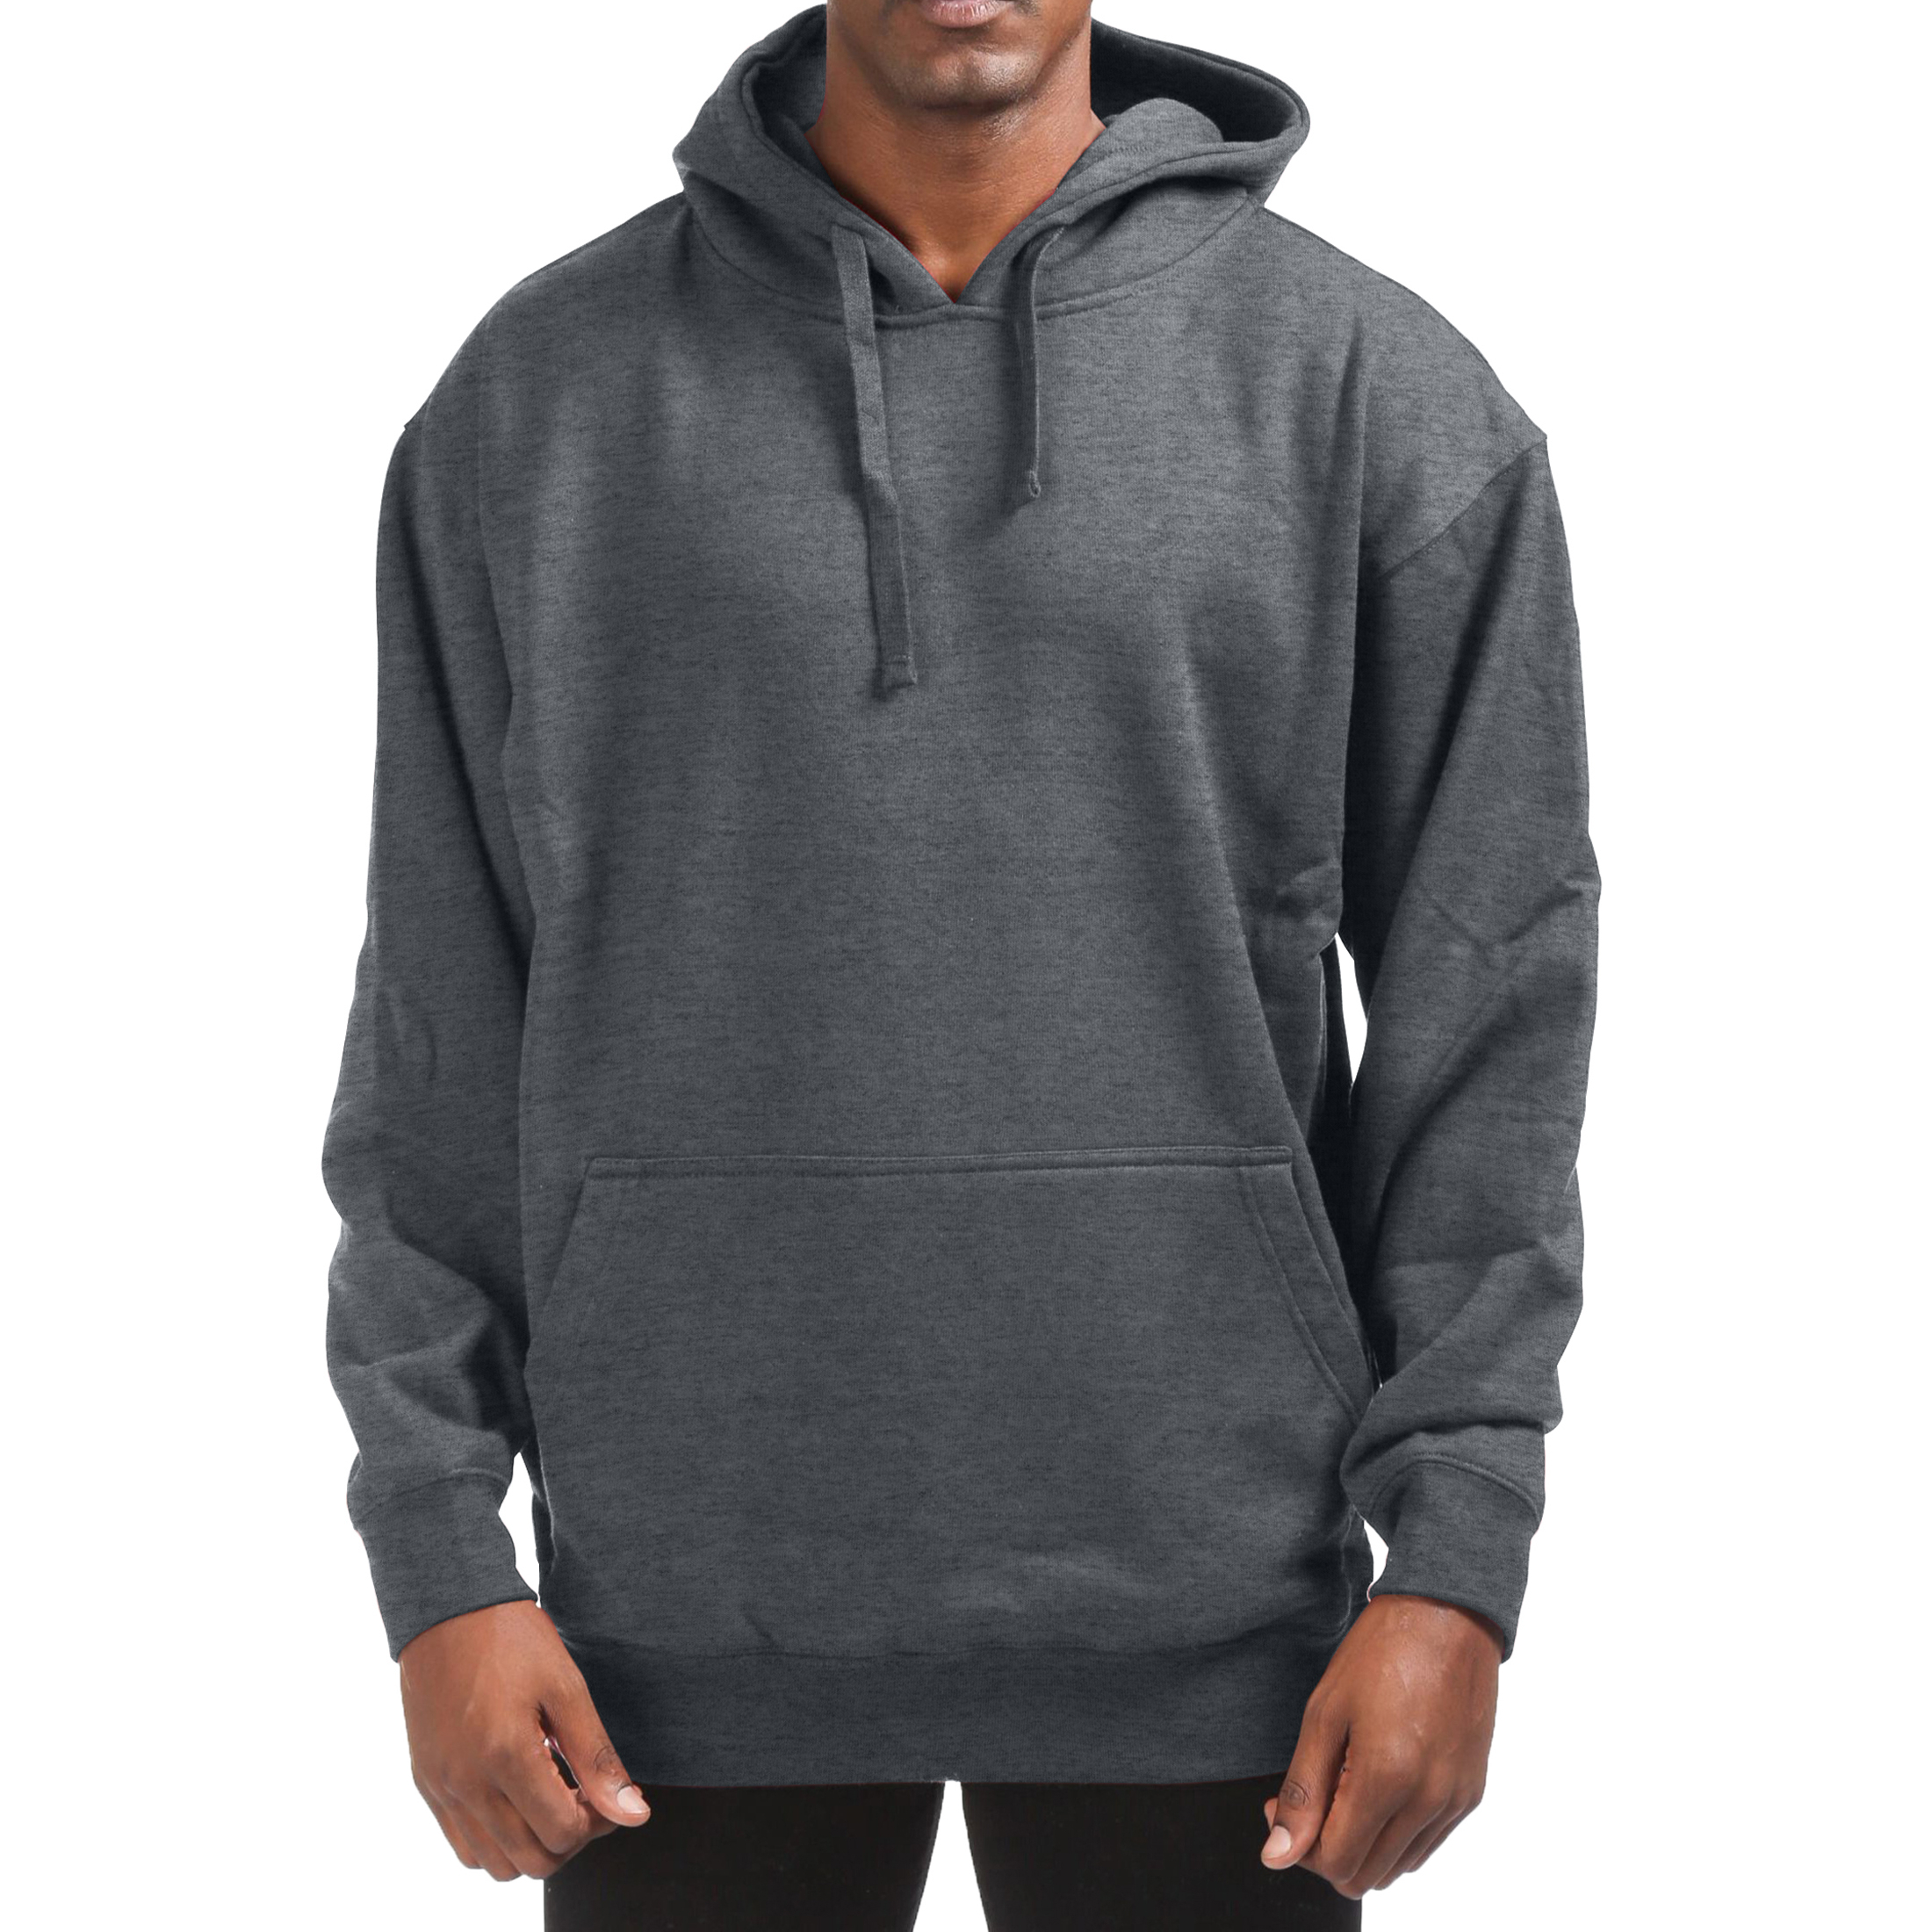 Men's Cotton-Blend Fleece Pullover Hoodie With Pocket (Big & Tall Sizes Available) - Charcoal, 2X-Large